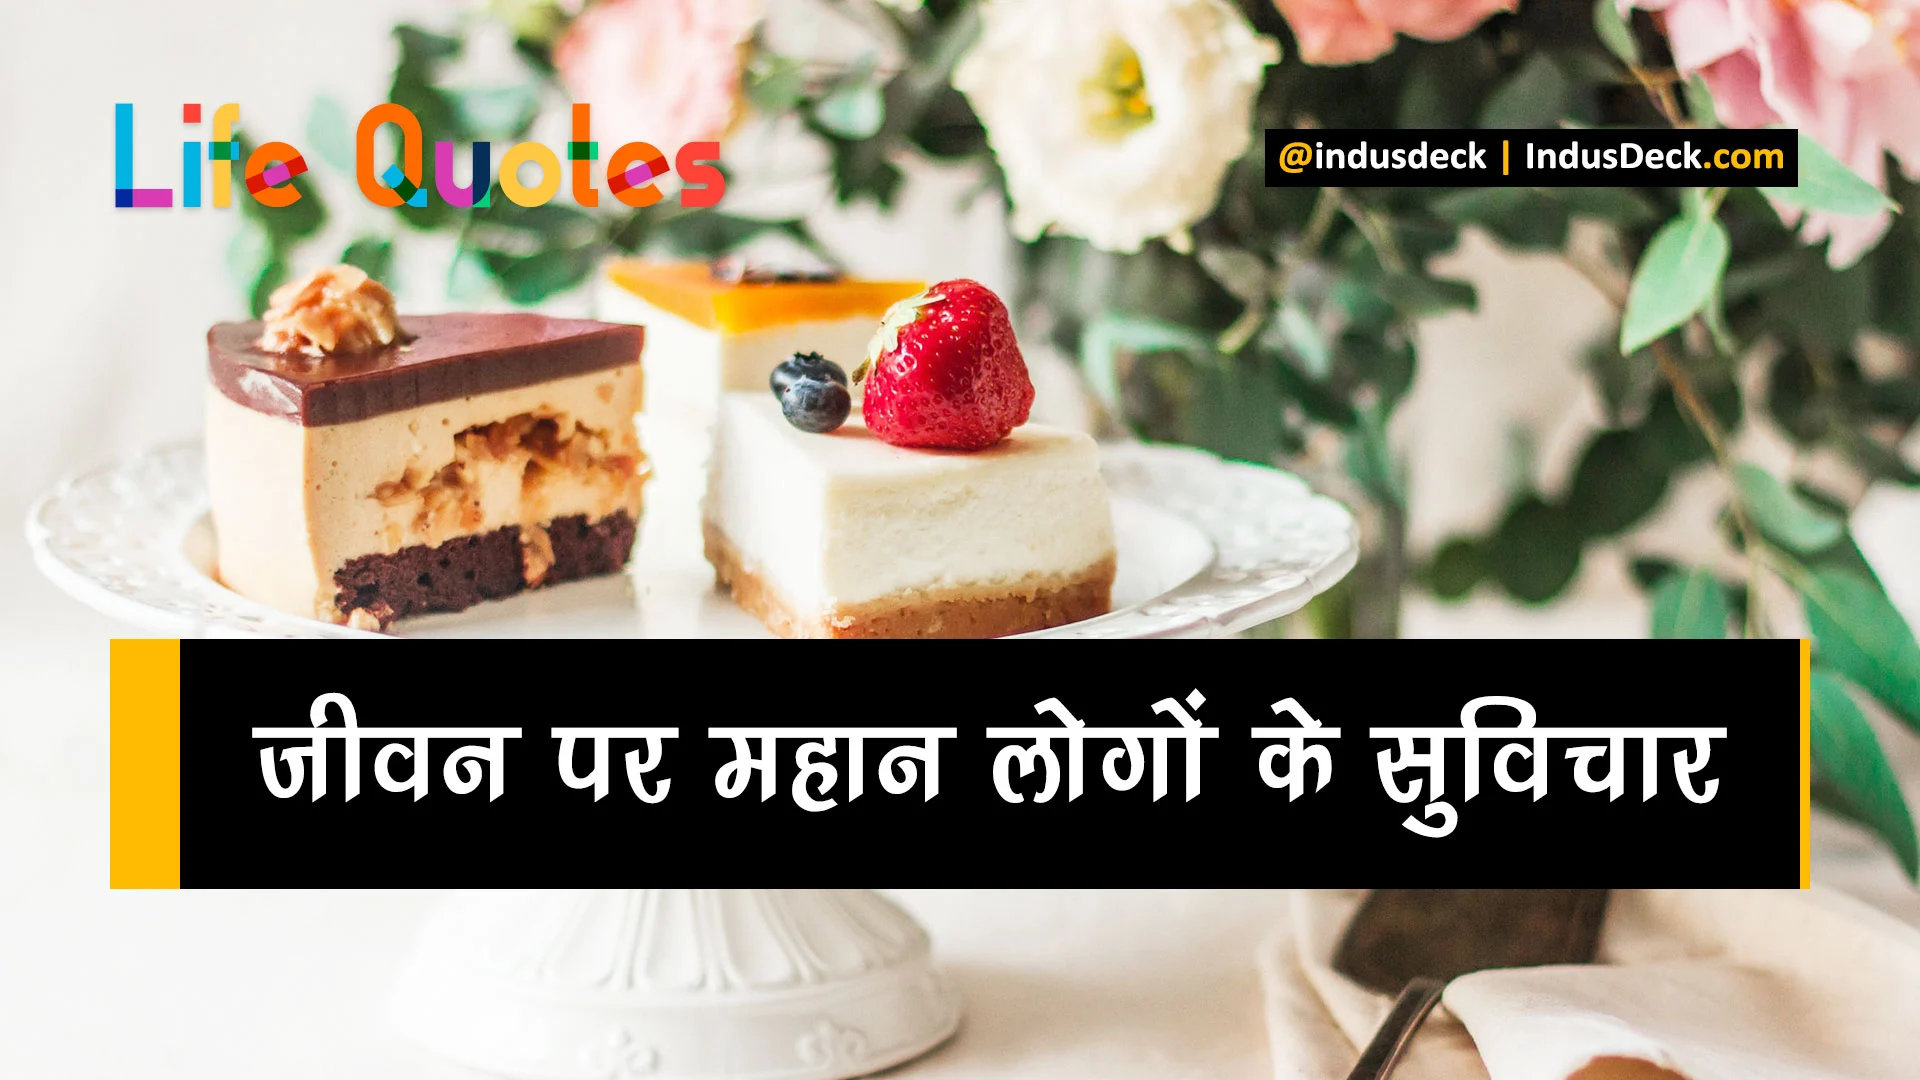 Life quotes in Hindi